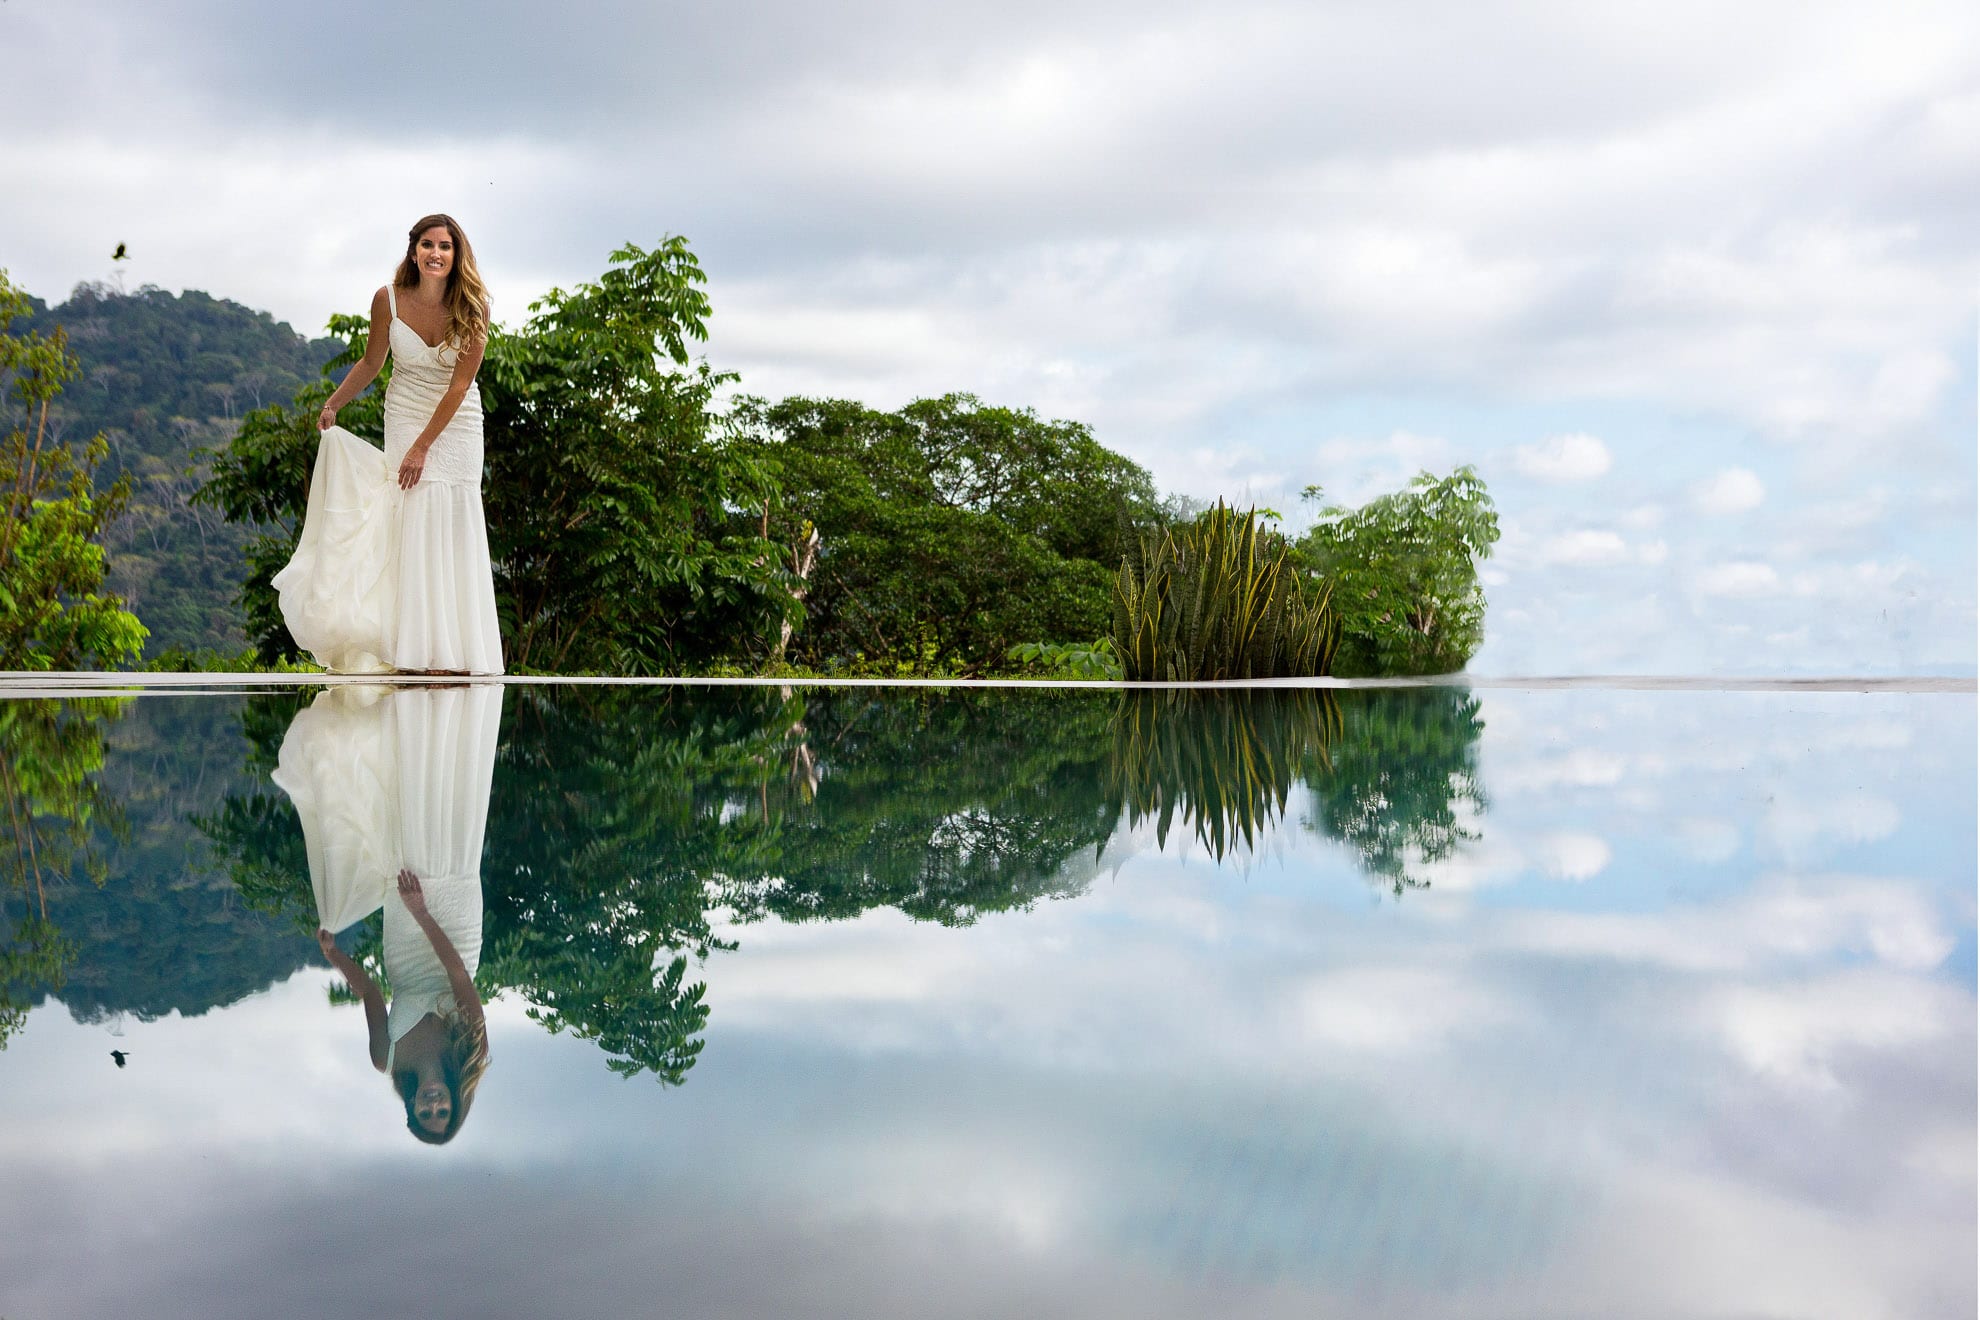 Bride reflection in infinity pool. Wedding in nature setting